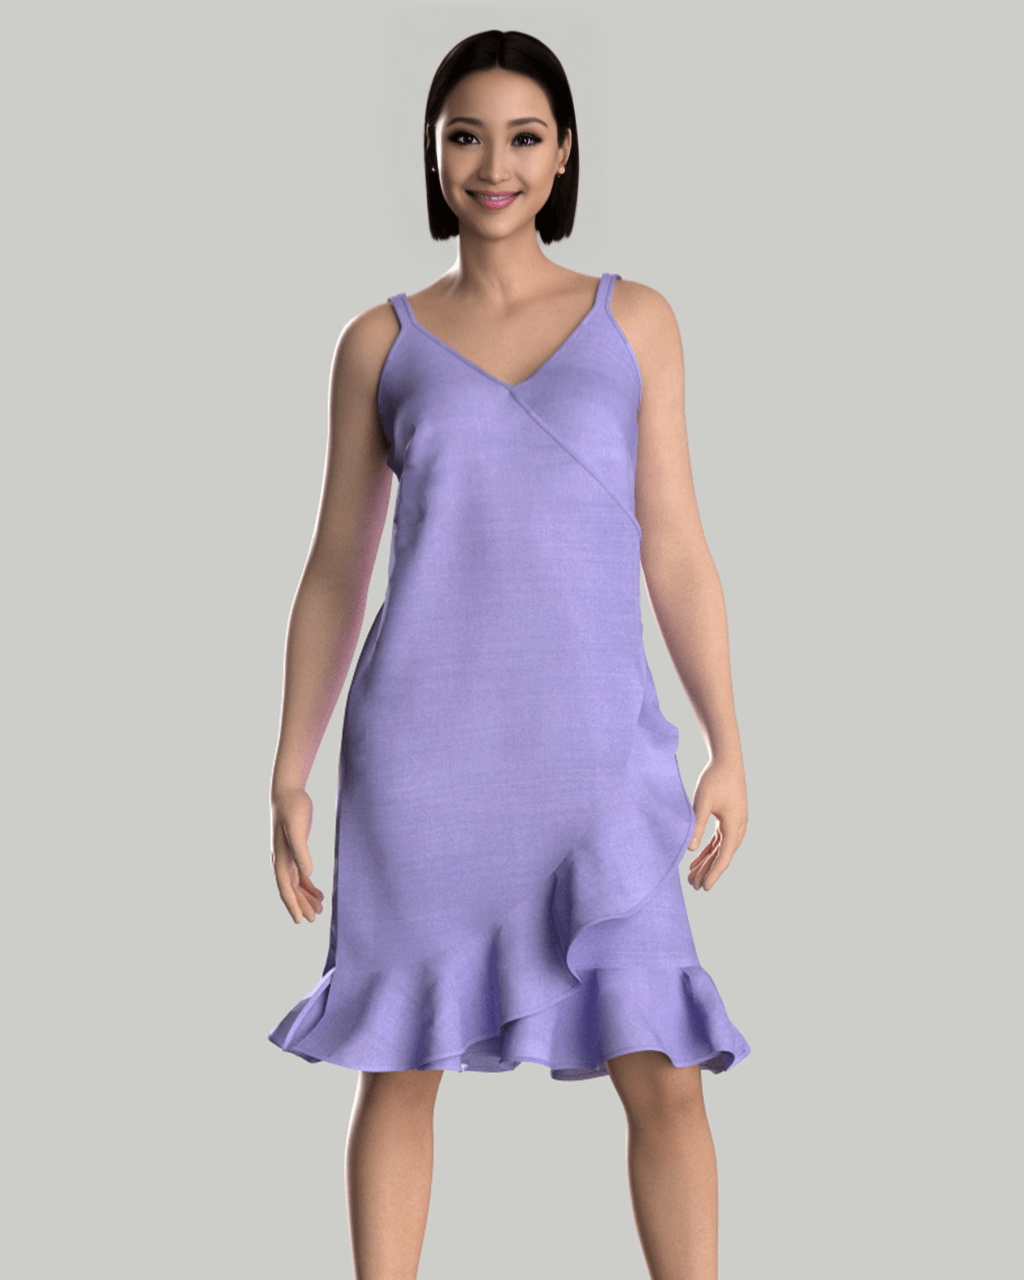 house of supr , made to fit dress, custom fir, purple color, forma;.office wear